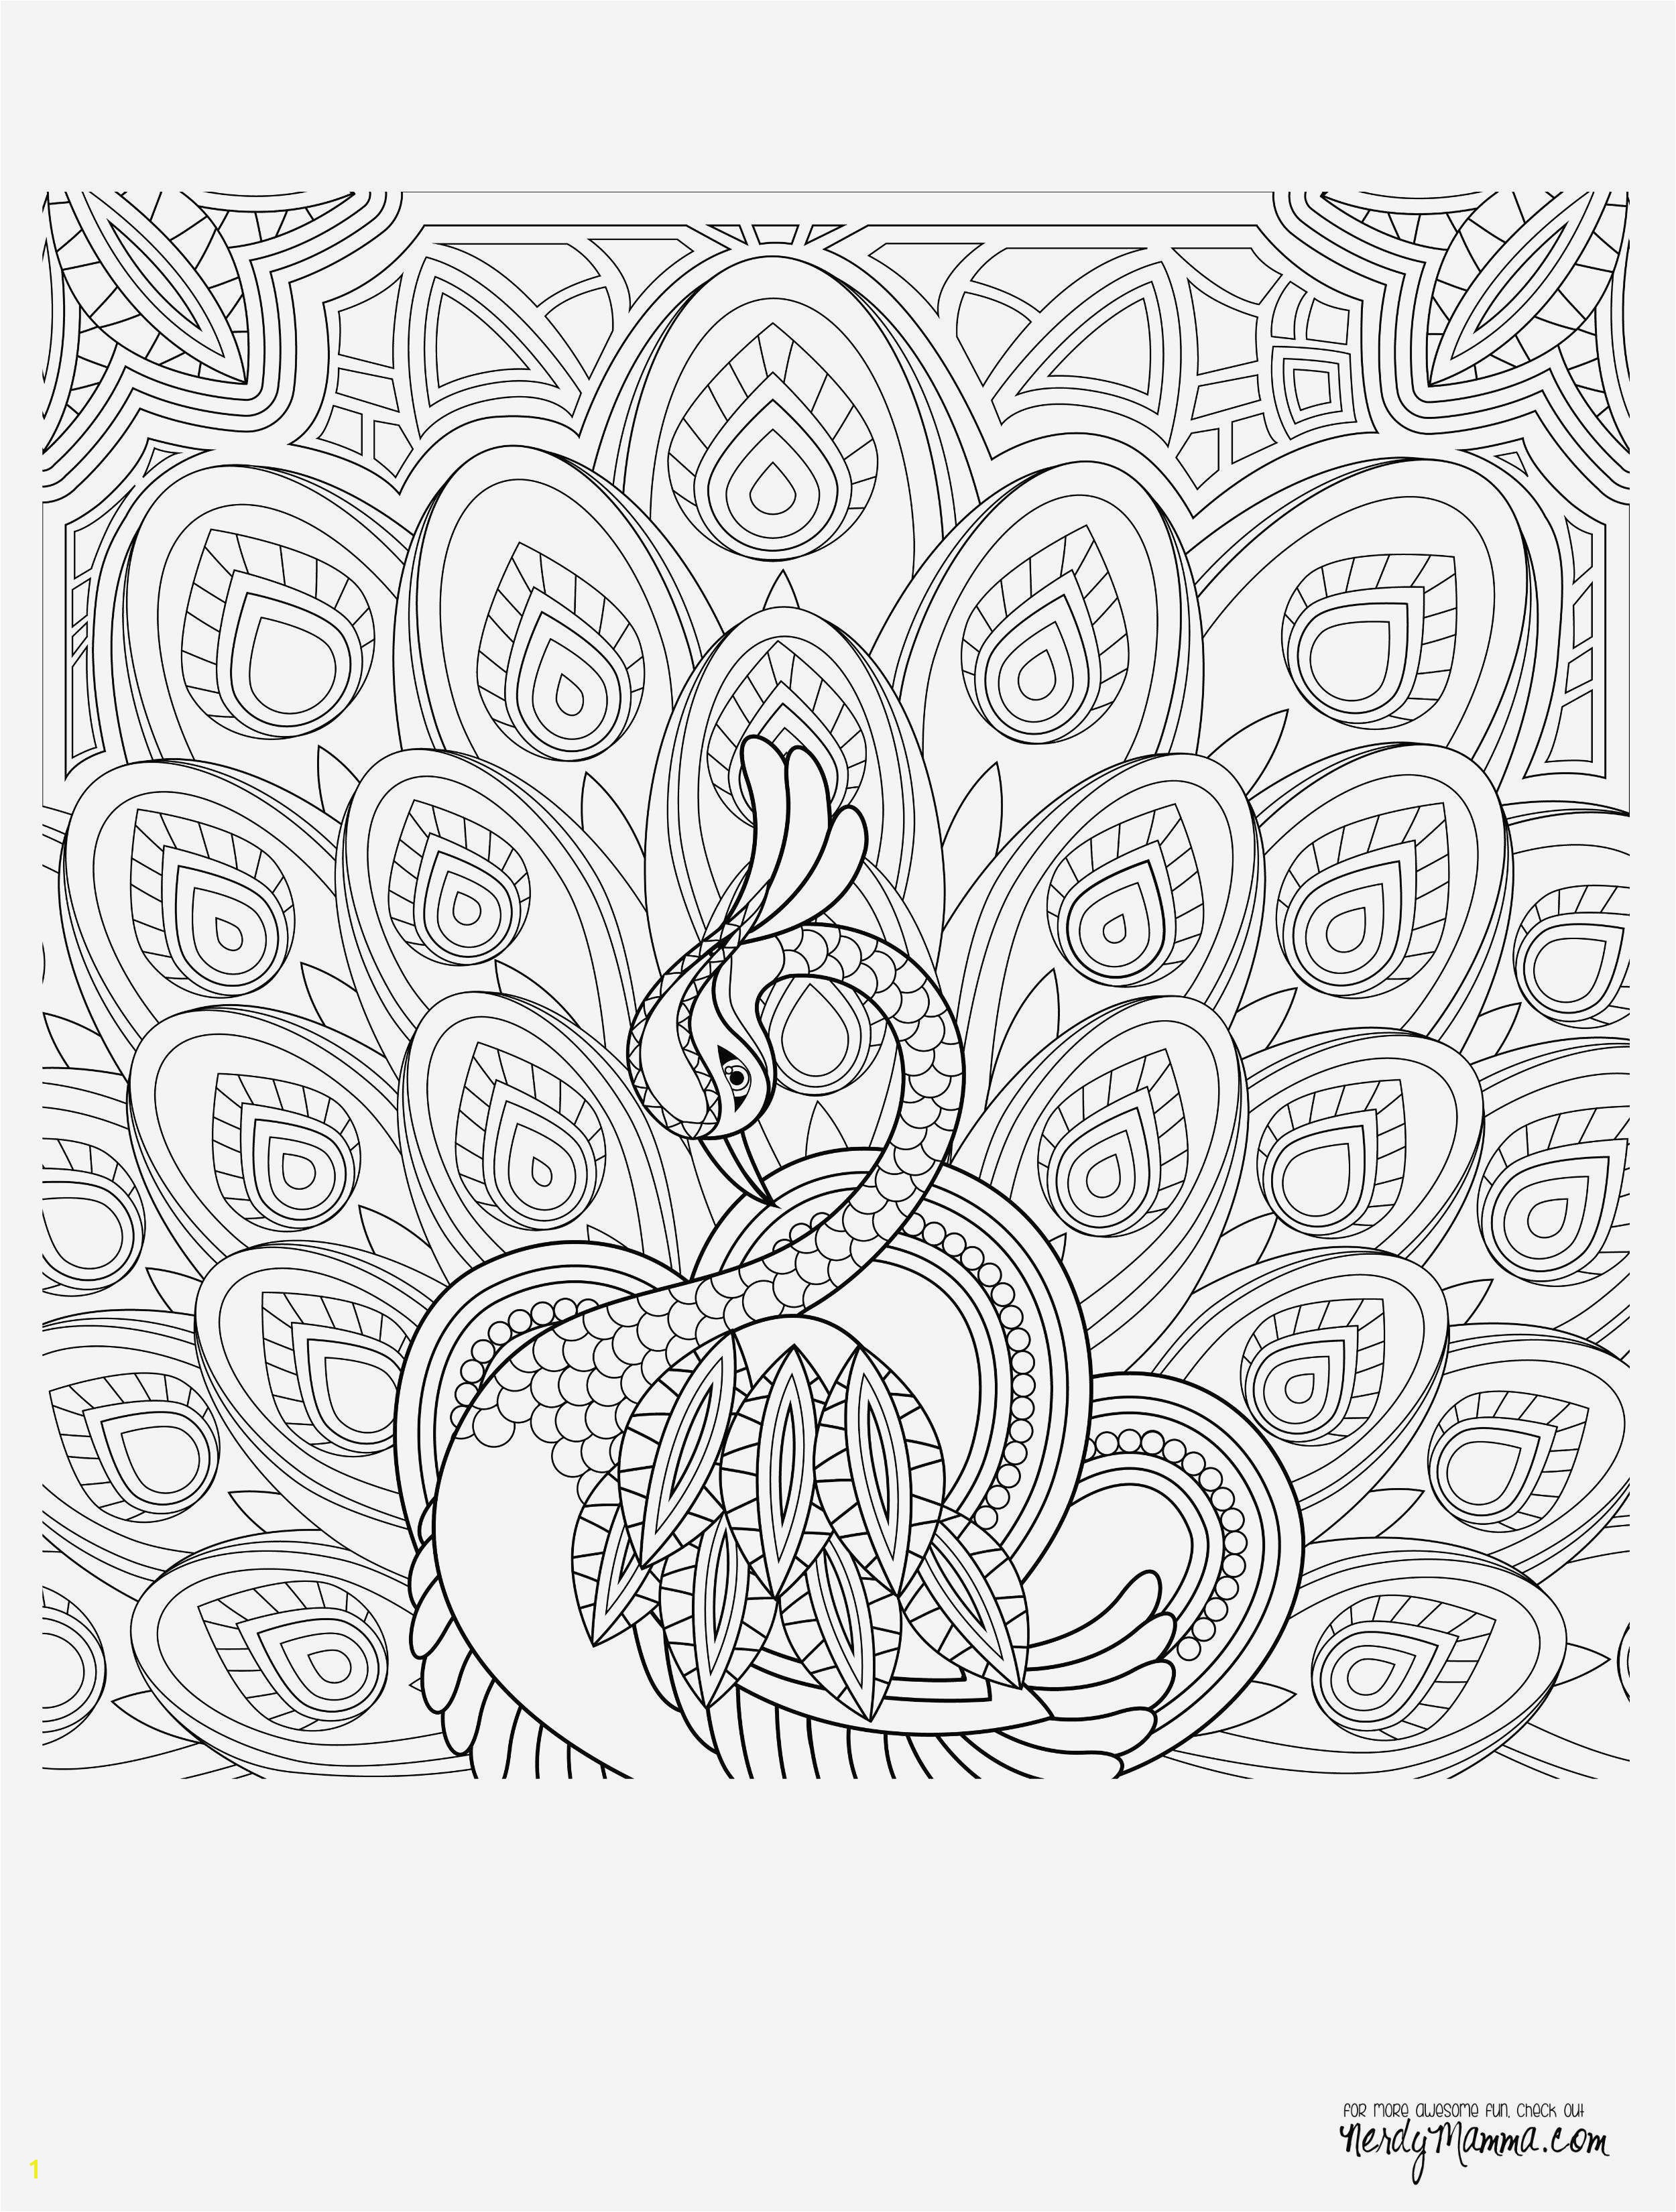 Coloring Pages Of the Nativity Scene 26 New Free Printable Puppy Coloring Pages Professional